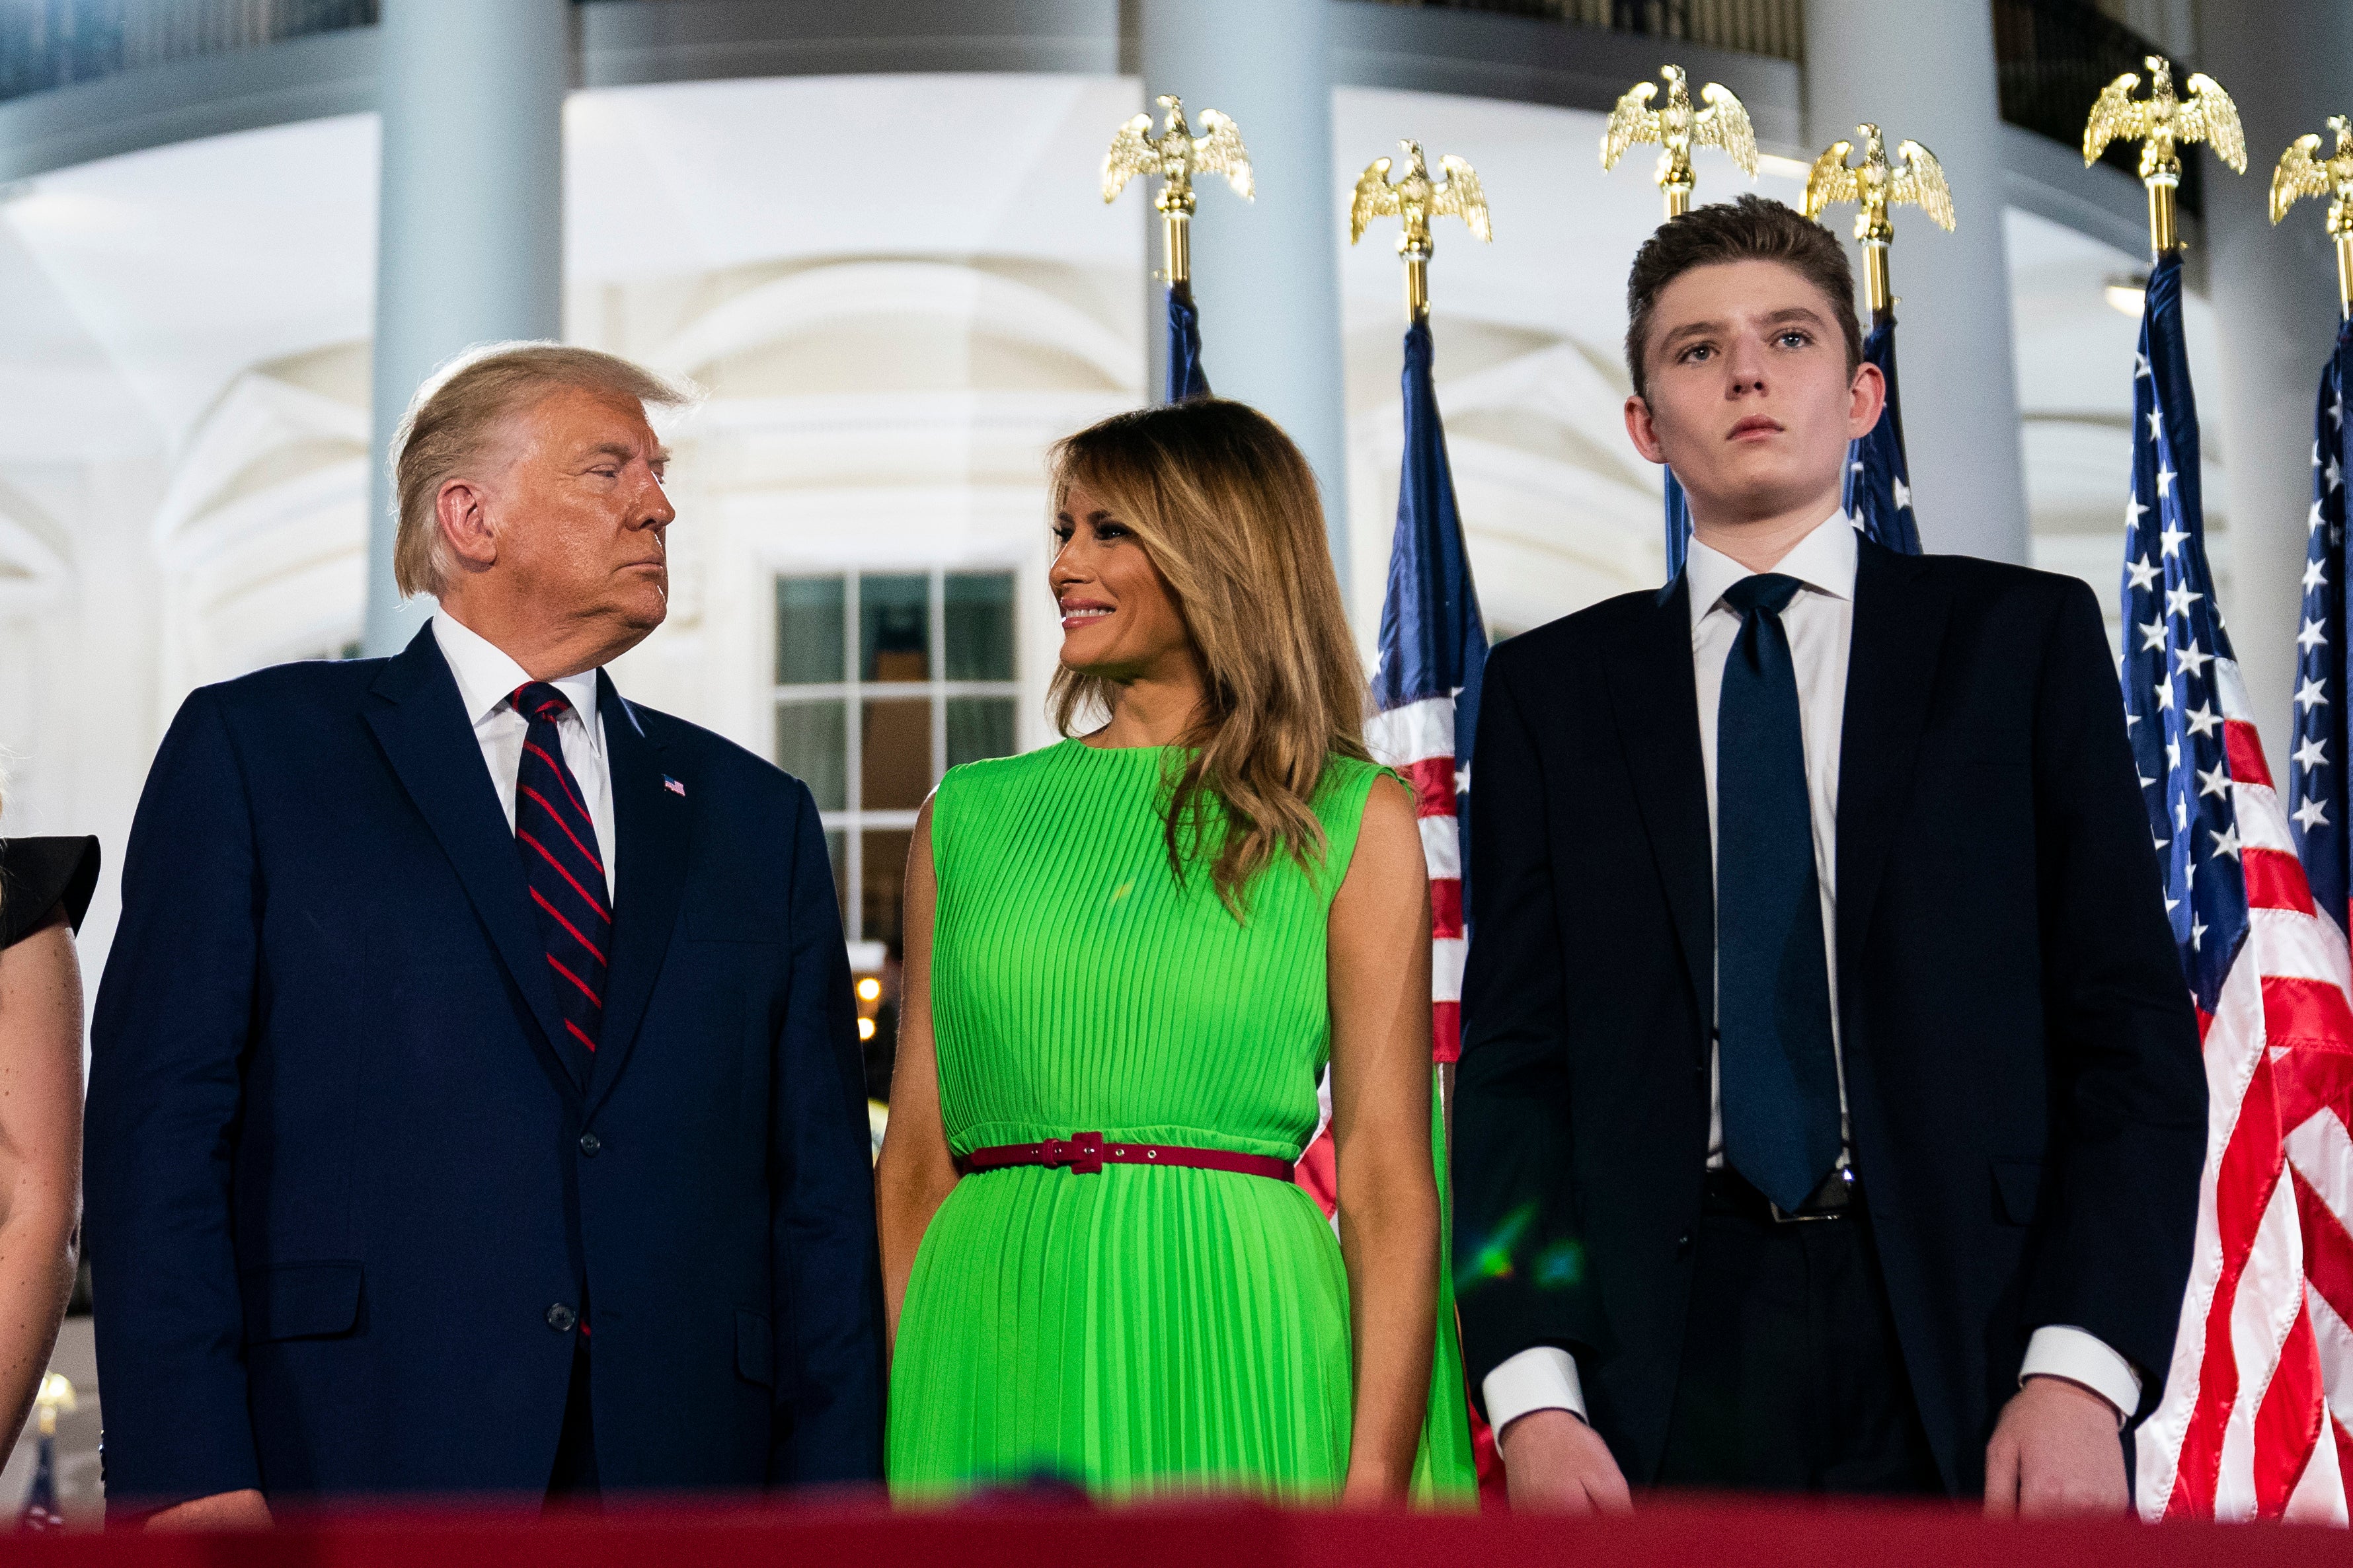 Donald Trump with then-first lady Melania Trump and their son Barron as the former delivered his acceptance speech for the Republican presidential nomination on the South Lawn of the White House on 27 August 2020